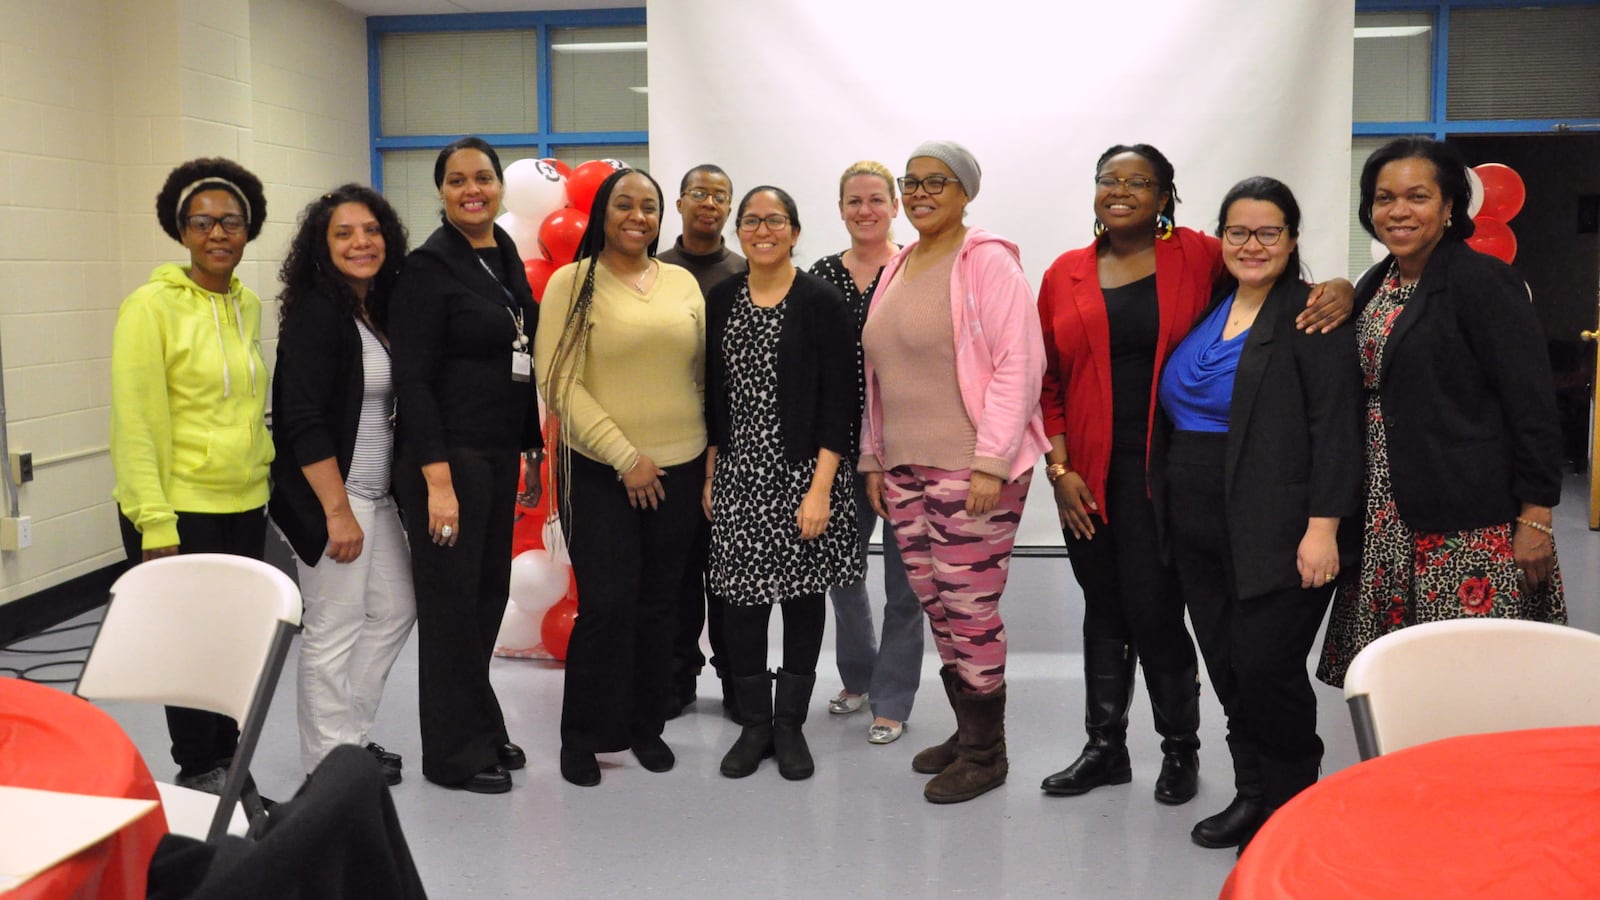 District officials, community members, and Newark parents gathered on Wednesday night at Spencer Miller Community School for the district's latest parent engagement meeting.